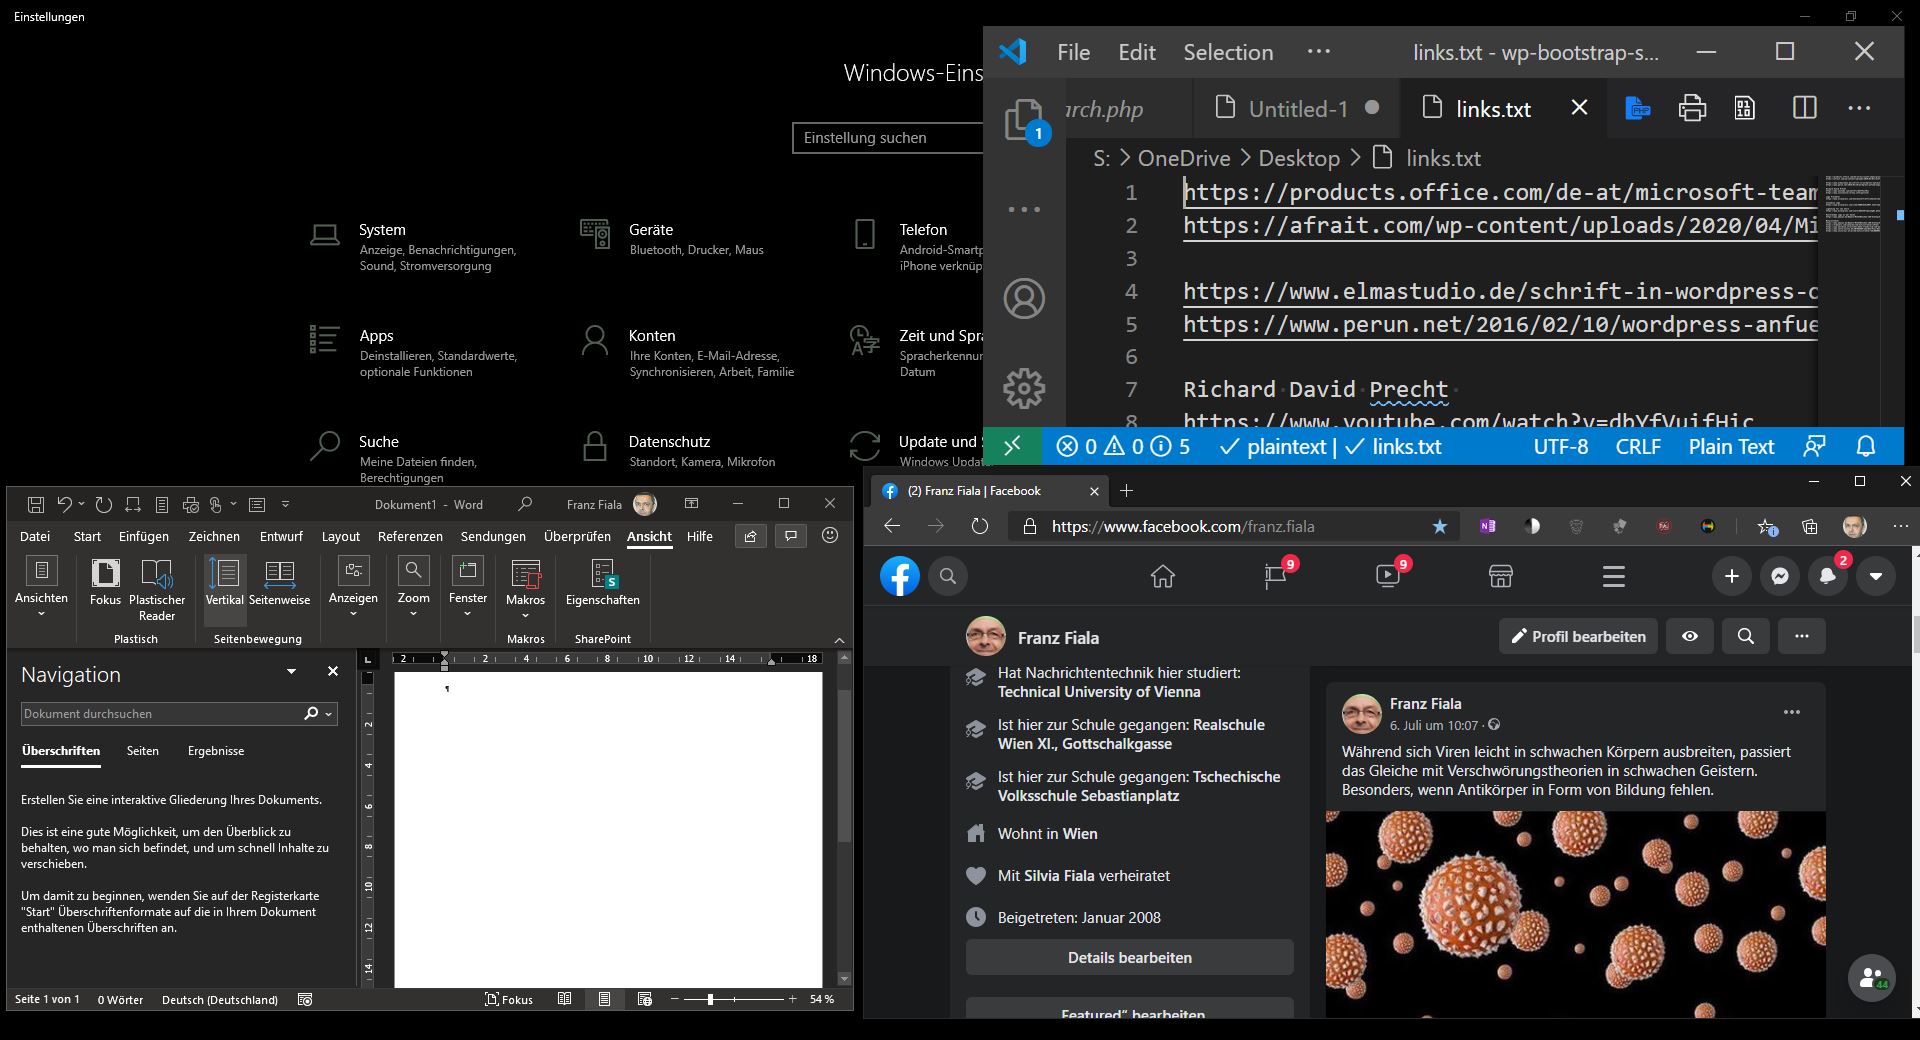 Dark Mode – Back to the Roots